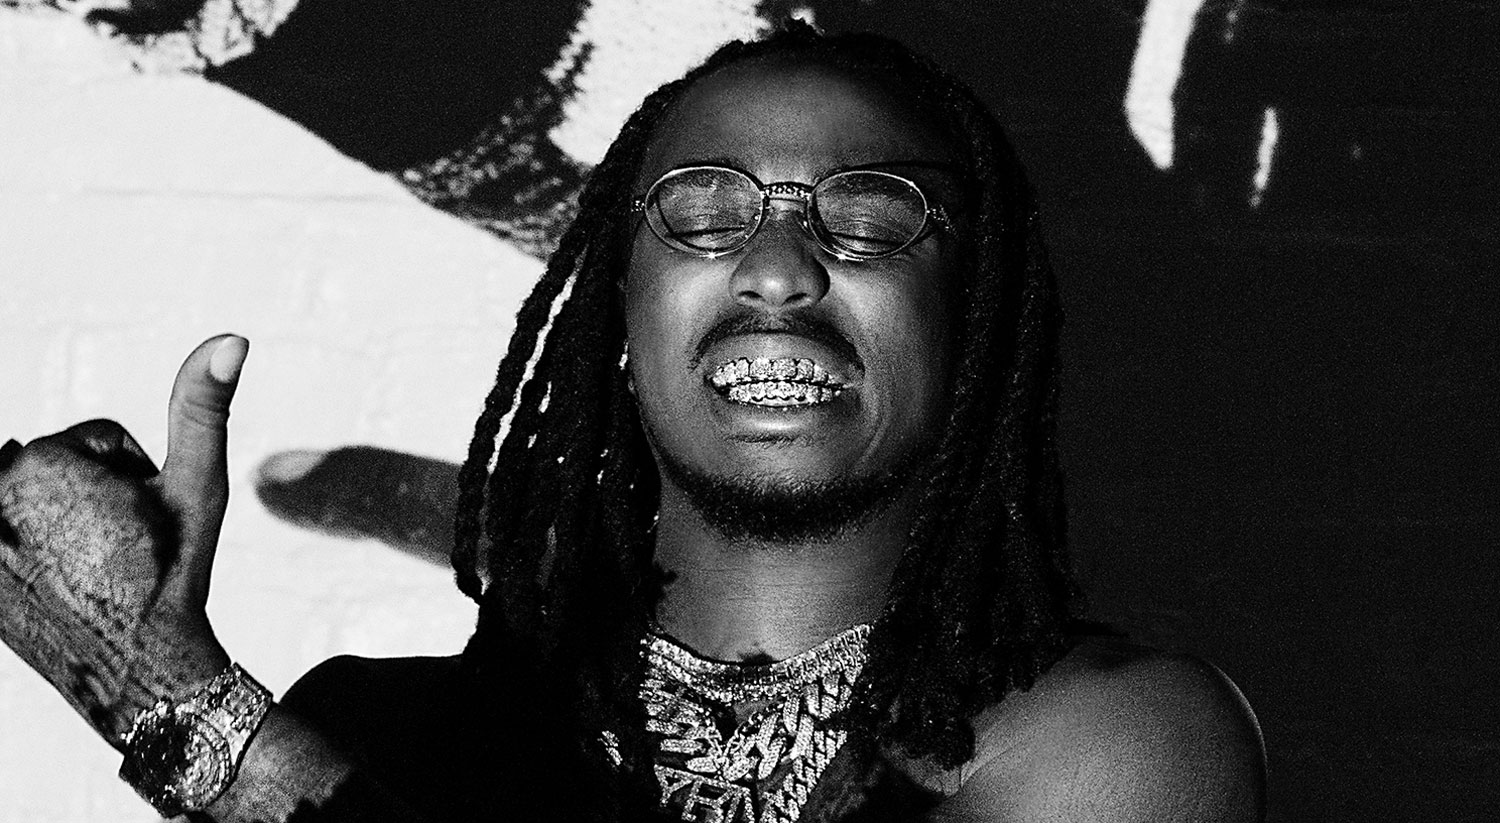 Quavo Makes A Statement With Martell Cognac photo